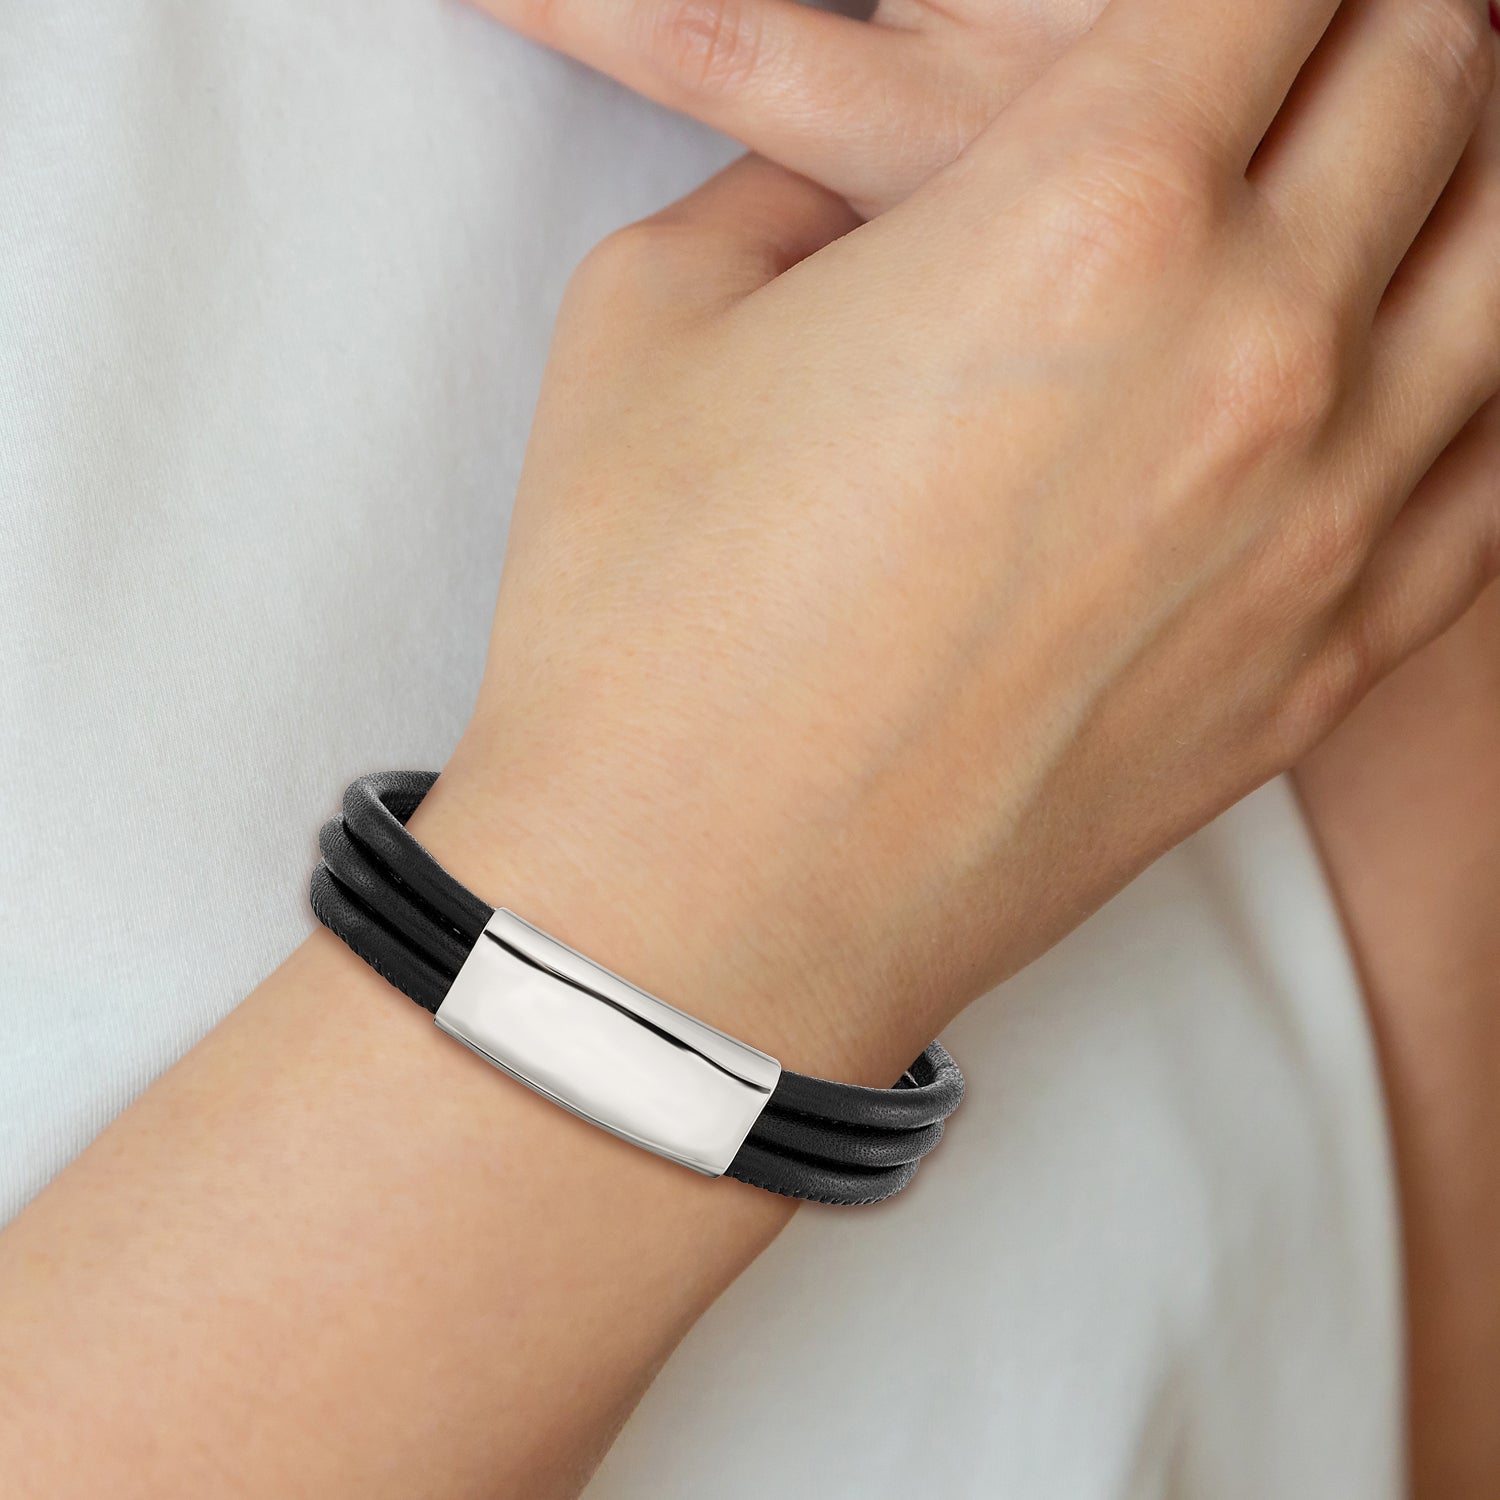 Stainless Steel Polished Black Leather 8in ID Bracelet